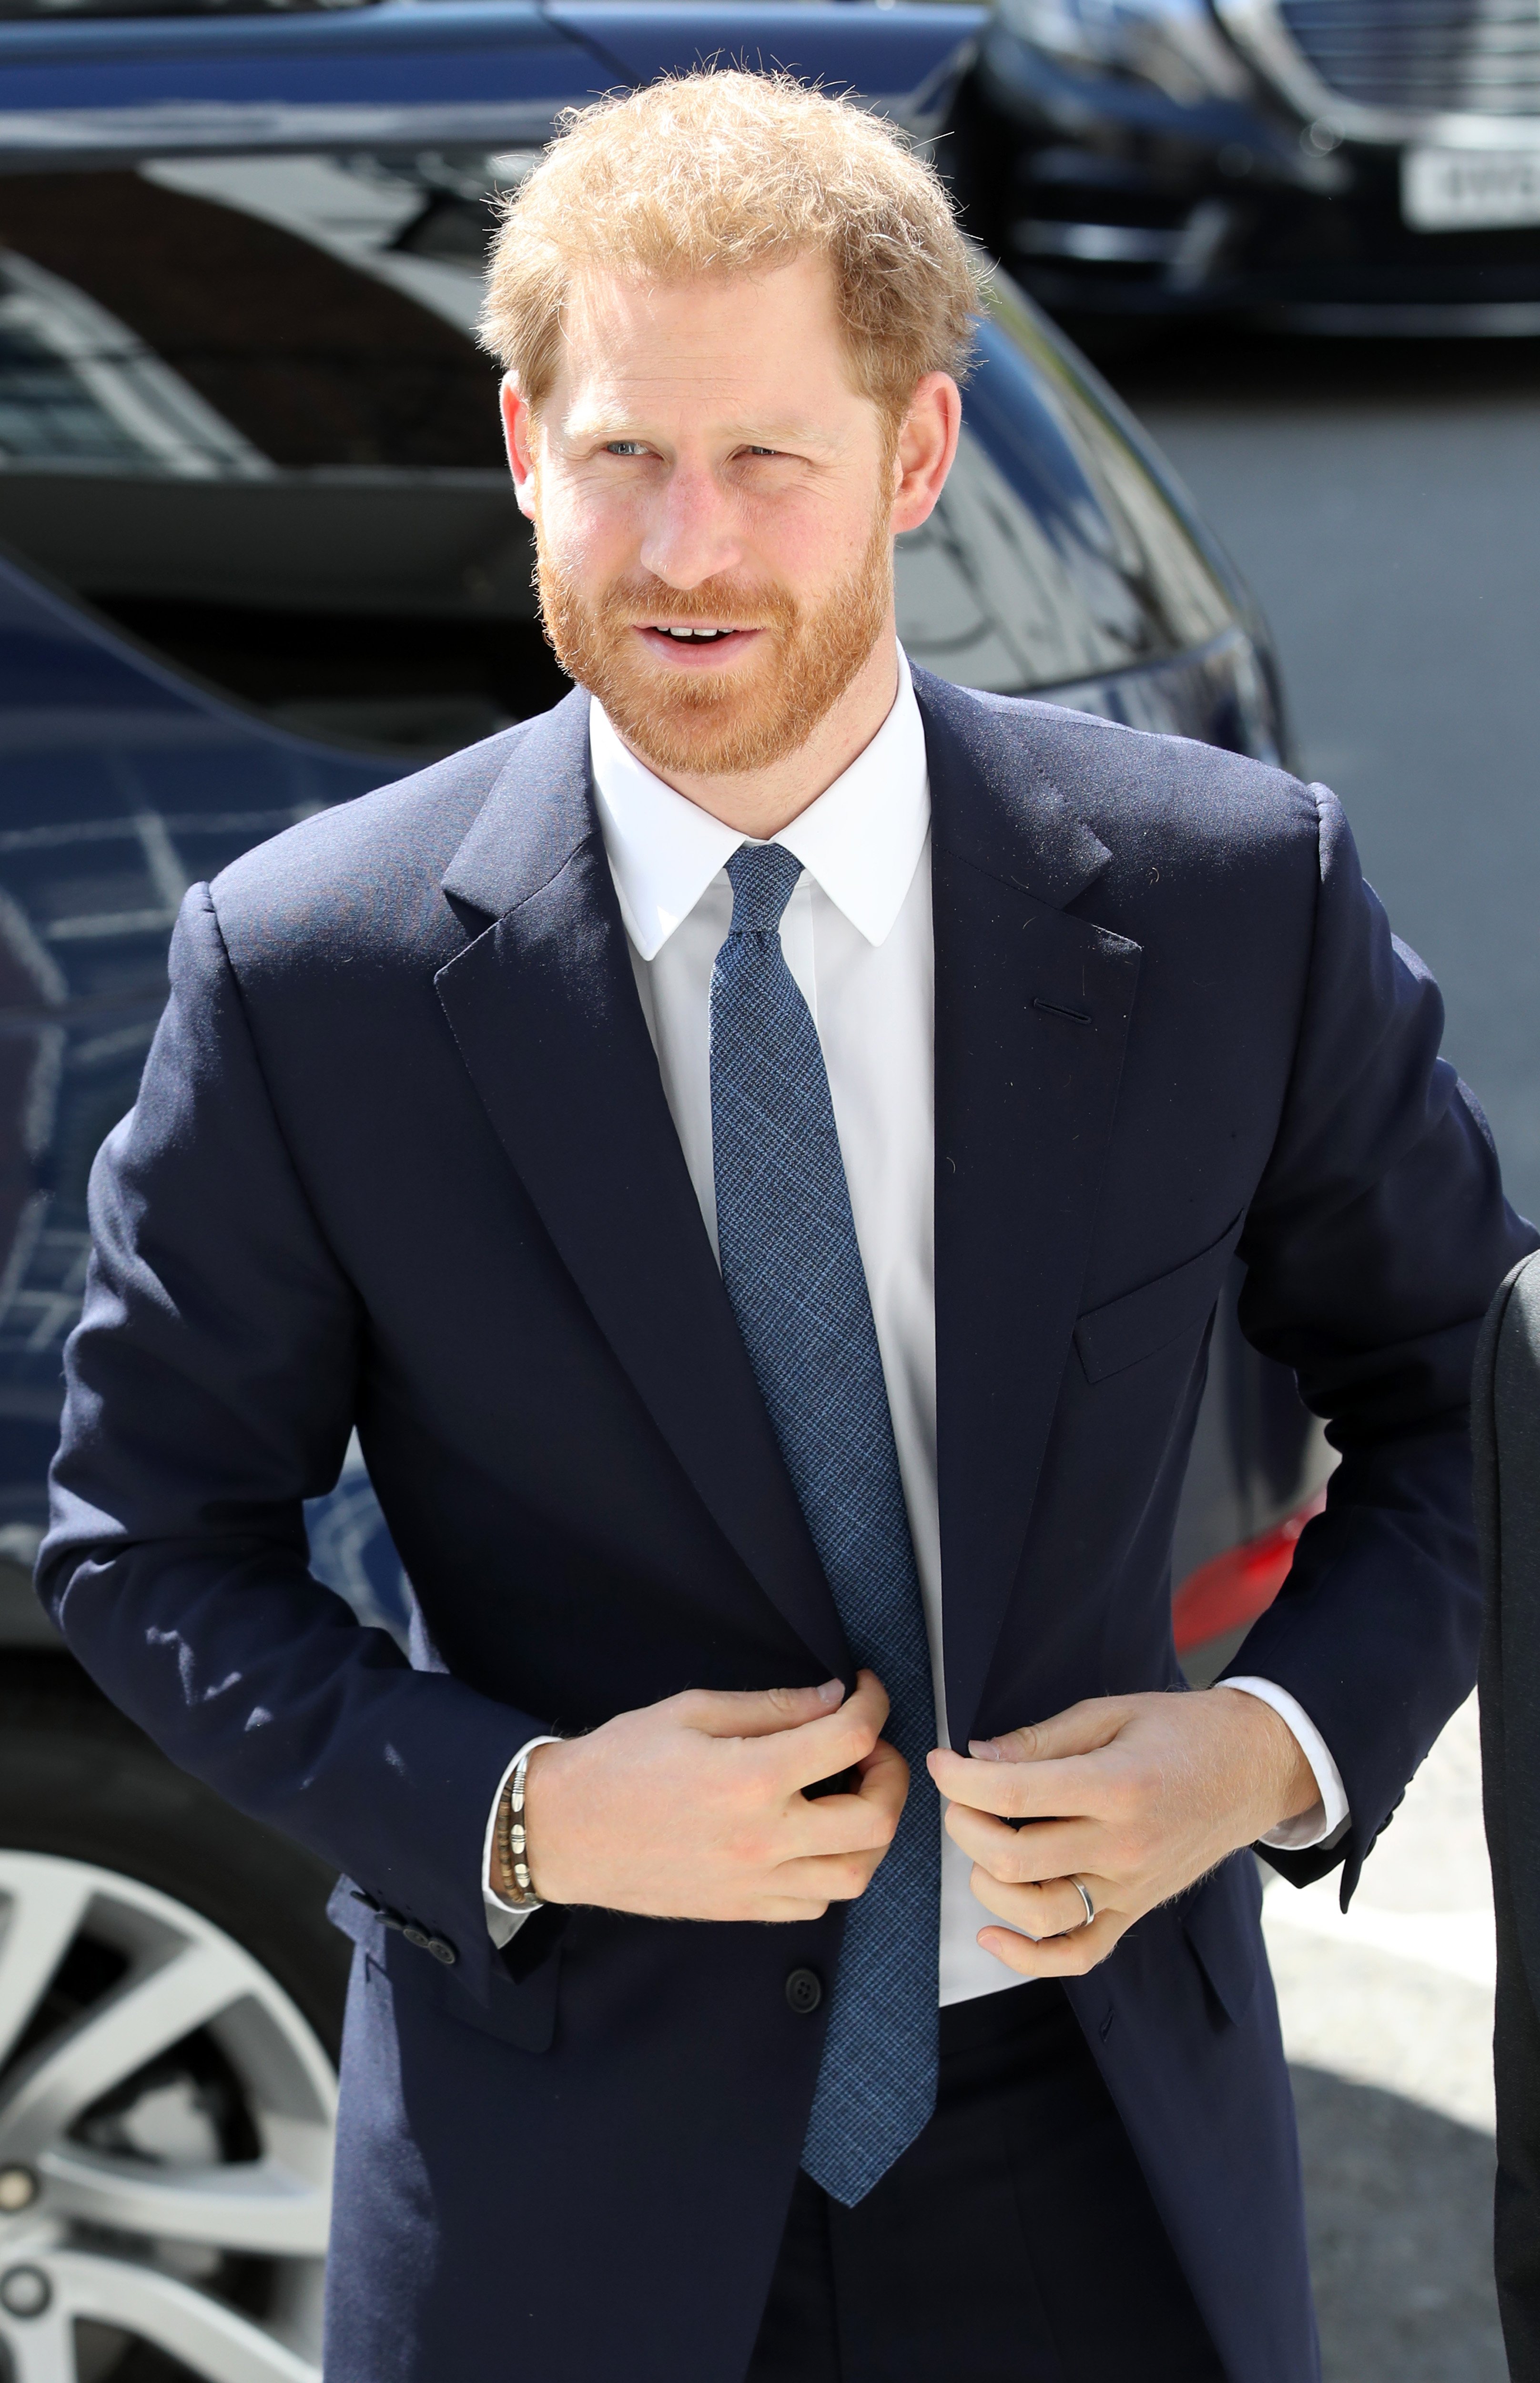 Prince Harry, Duke of Sussex arrives at Chatham House on June 17, 2019 in London Colney, England | Source: Getty Images